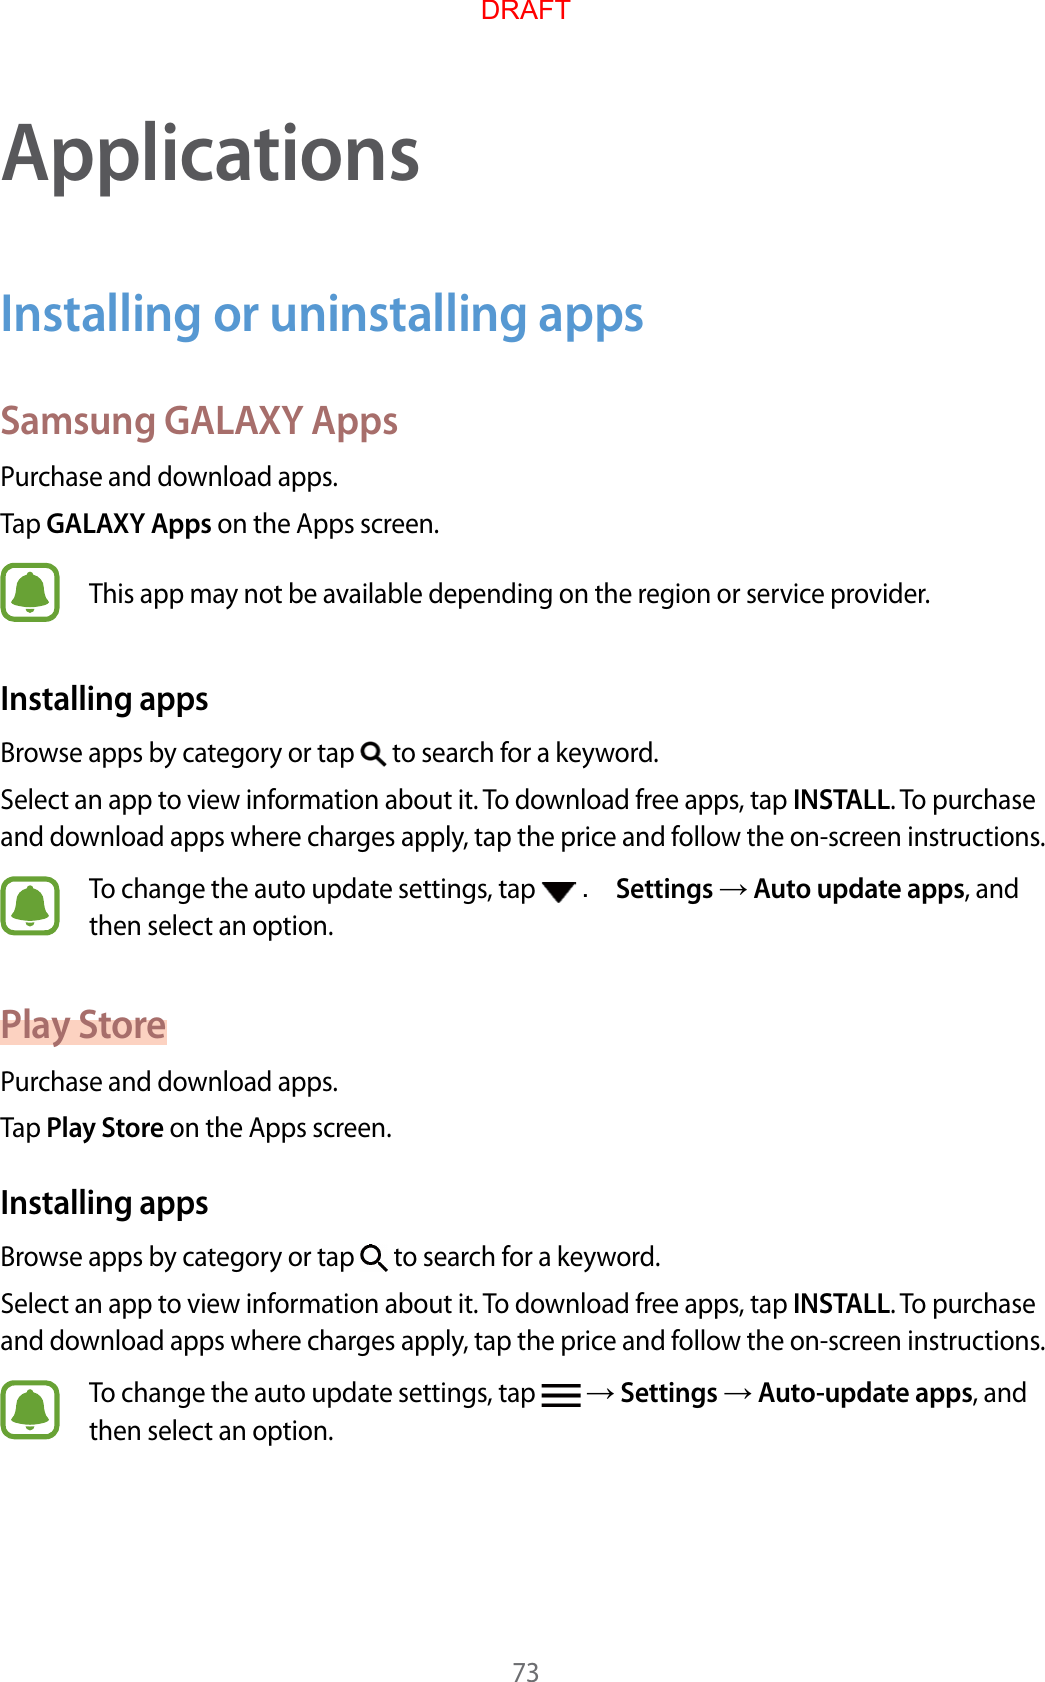 73ApplicationsInstalling or uninstalling appsSamsung GALAXY AppsPurchase and download apps.Tap GALAXY Apps on the Apps screen.This app may not be available depending on the region or service provider.Installing appsBrowse apps by category or tap   to search for a keyword.Select an app to view information about it. To download free apps, tap INSTALL. To purchase and download apps where charges apply, tap the price and follow the on-screen instructions.To change the auto update settings, tap   . Settings  Auto update apps, and then select an option.Play StorePurchase and download apps.Tap Play Store on the Apps screen.Installing appsBrowse apps by category or tap   to search for a keyword.Select an app to view information about it. To download free apps, tap INSTALL. To purchase and download apps where charges apply, tap the price and follow the on-screen instructions.To change the auto update settings, tap    Settings  Auto-update apps, and then select an option.DRAFT